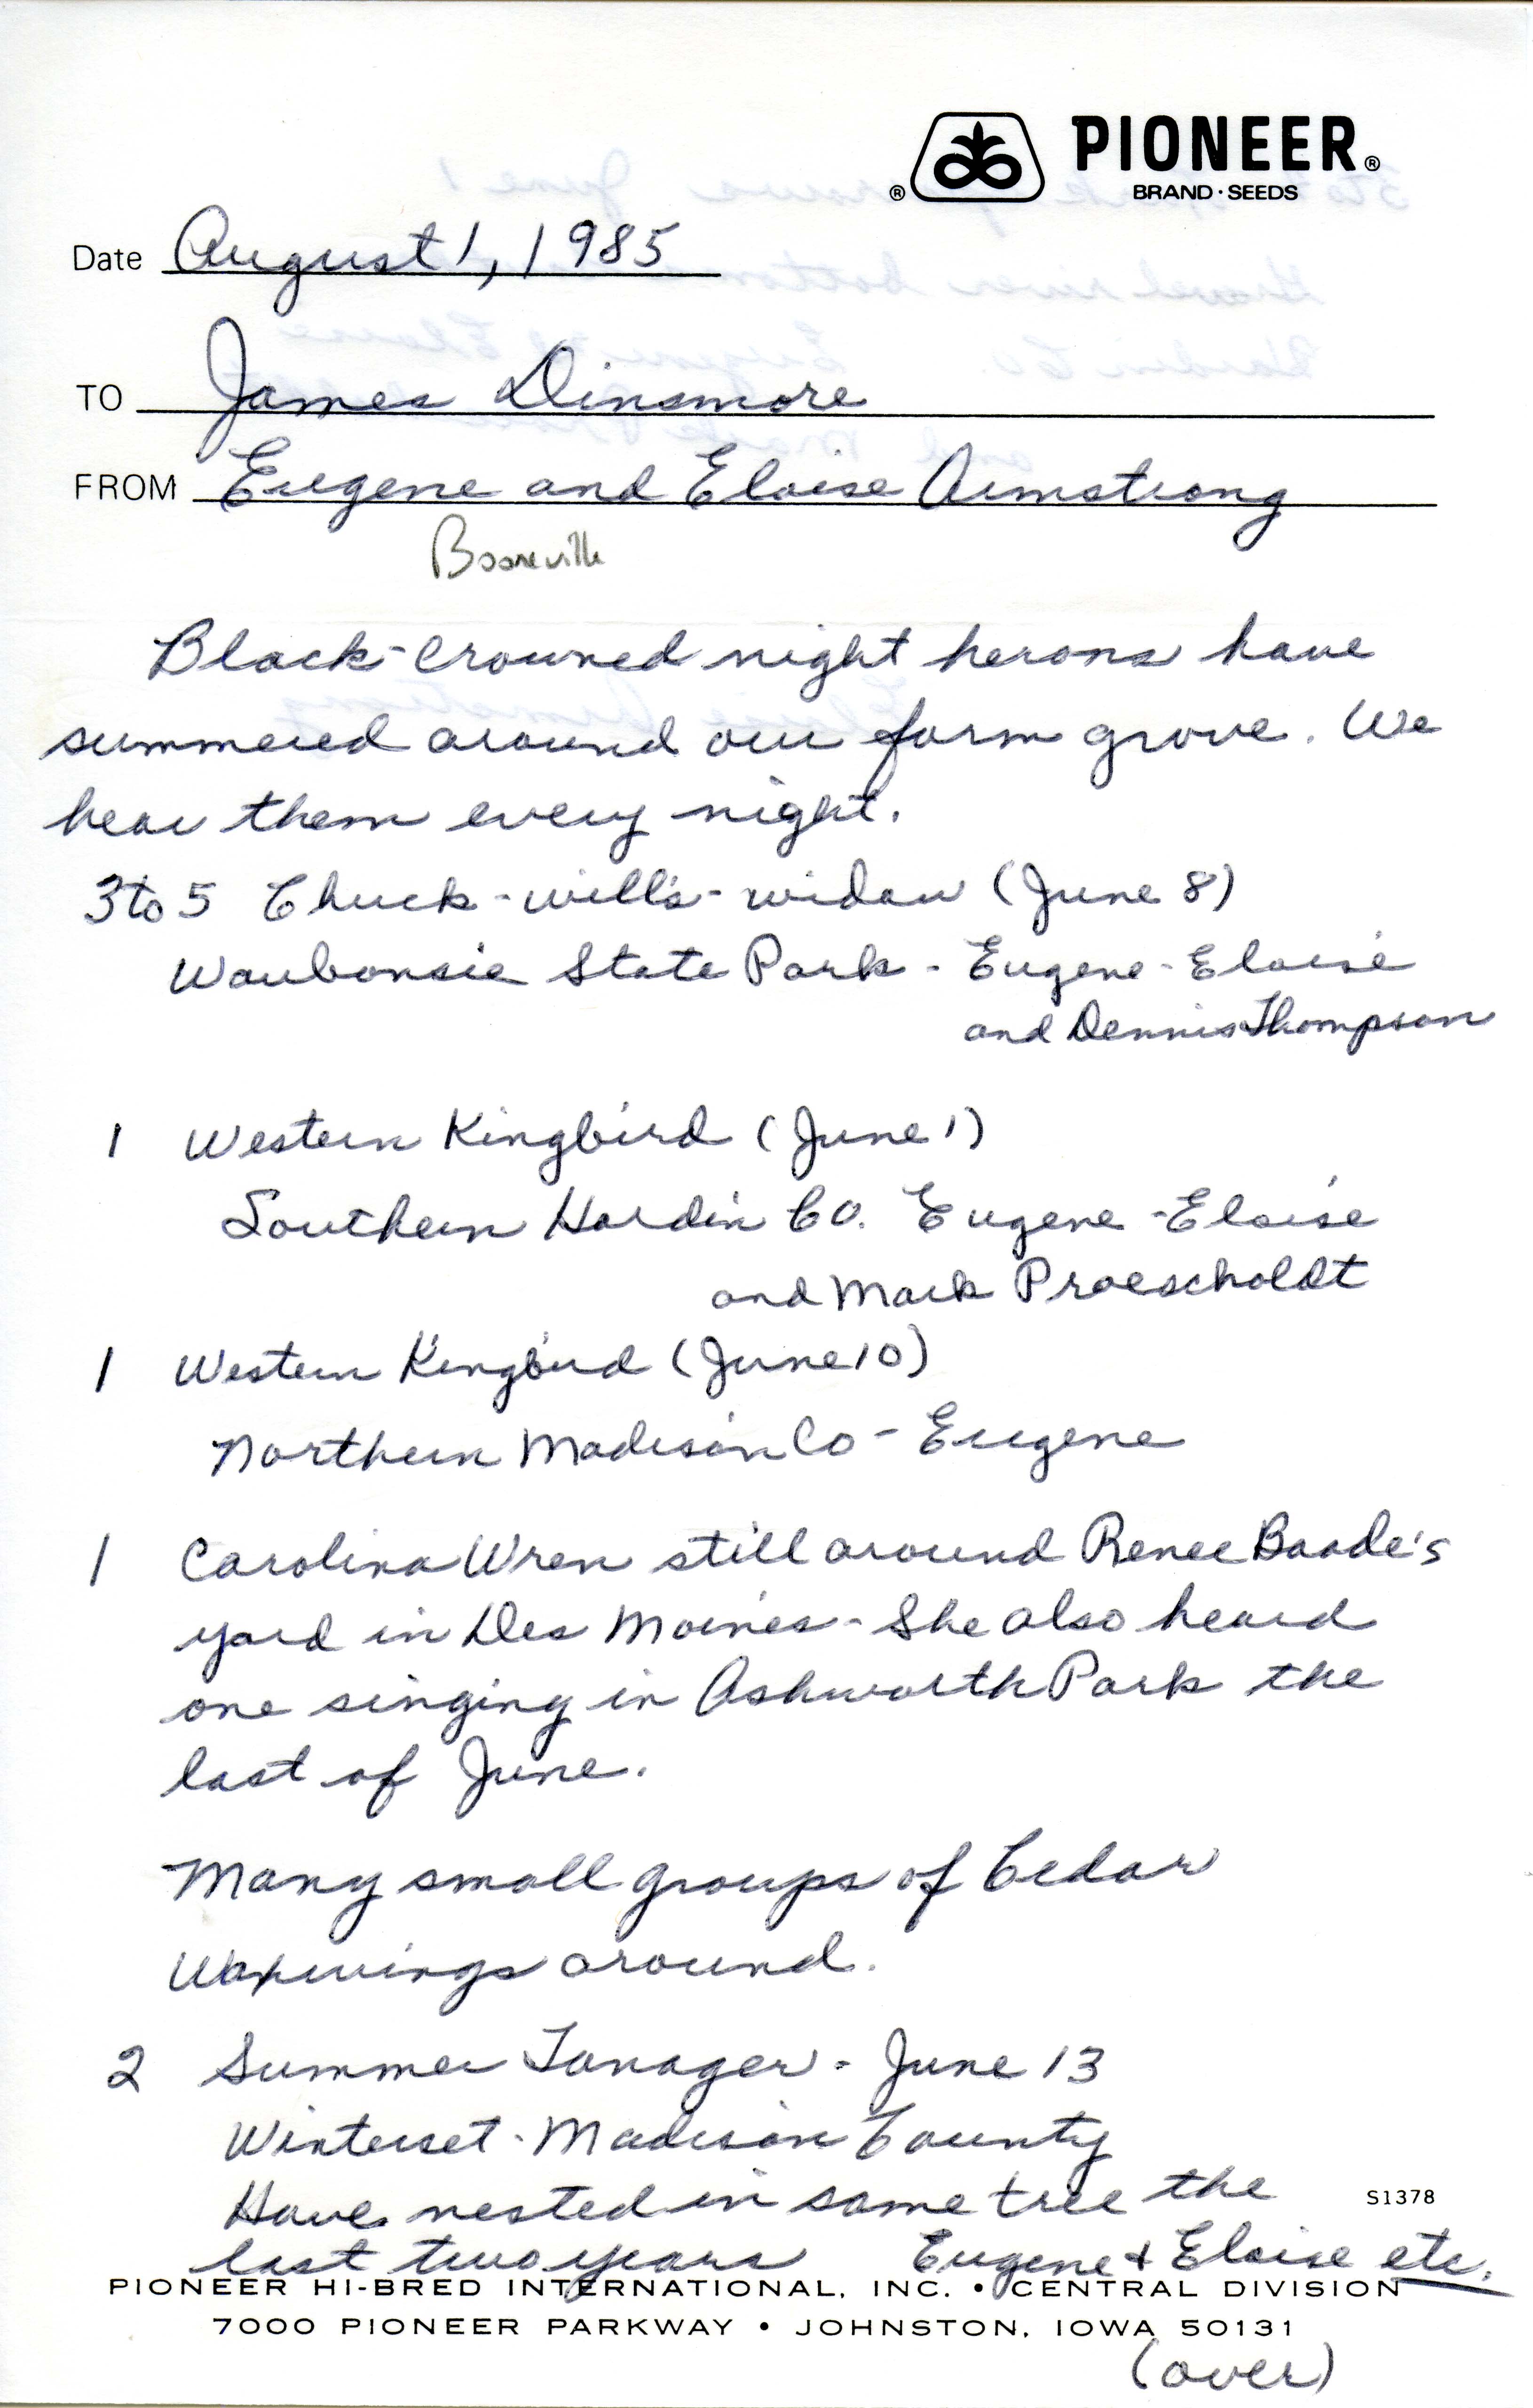 Eugene and Eloise Armstrong letter to James J. Dinsmore regarding field notes, August 1, 1985